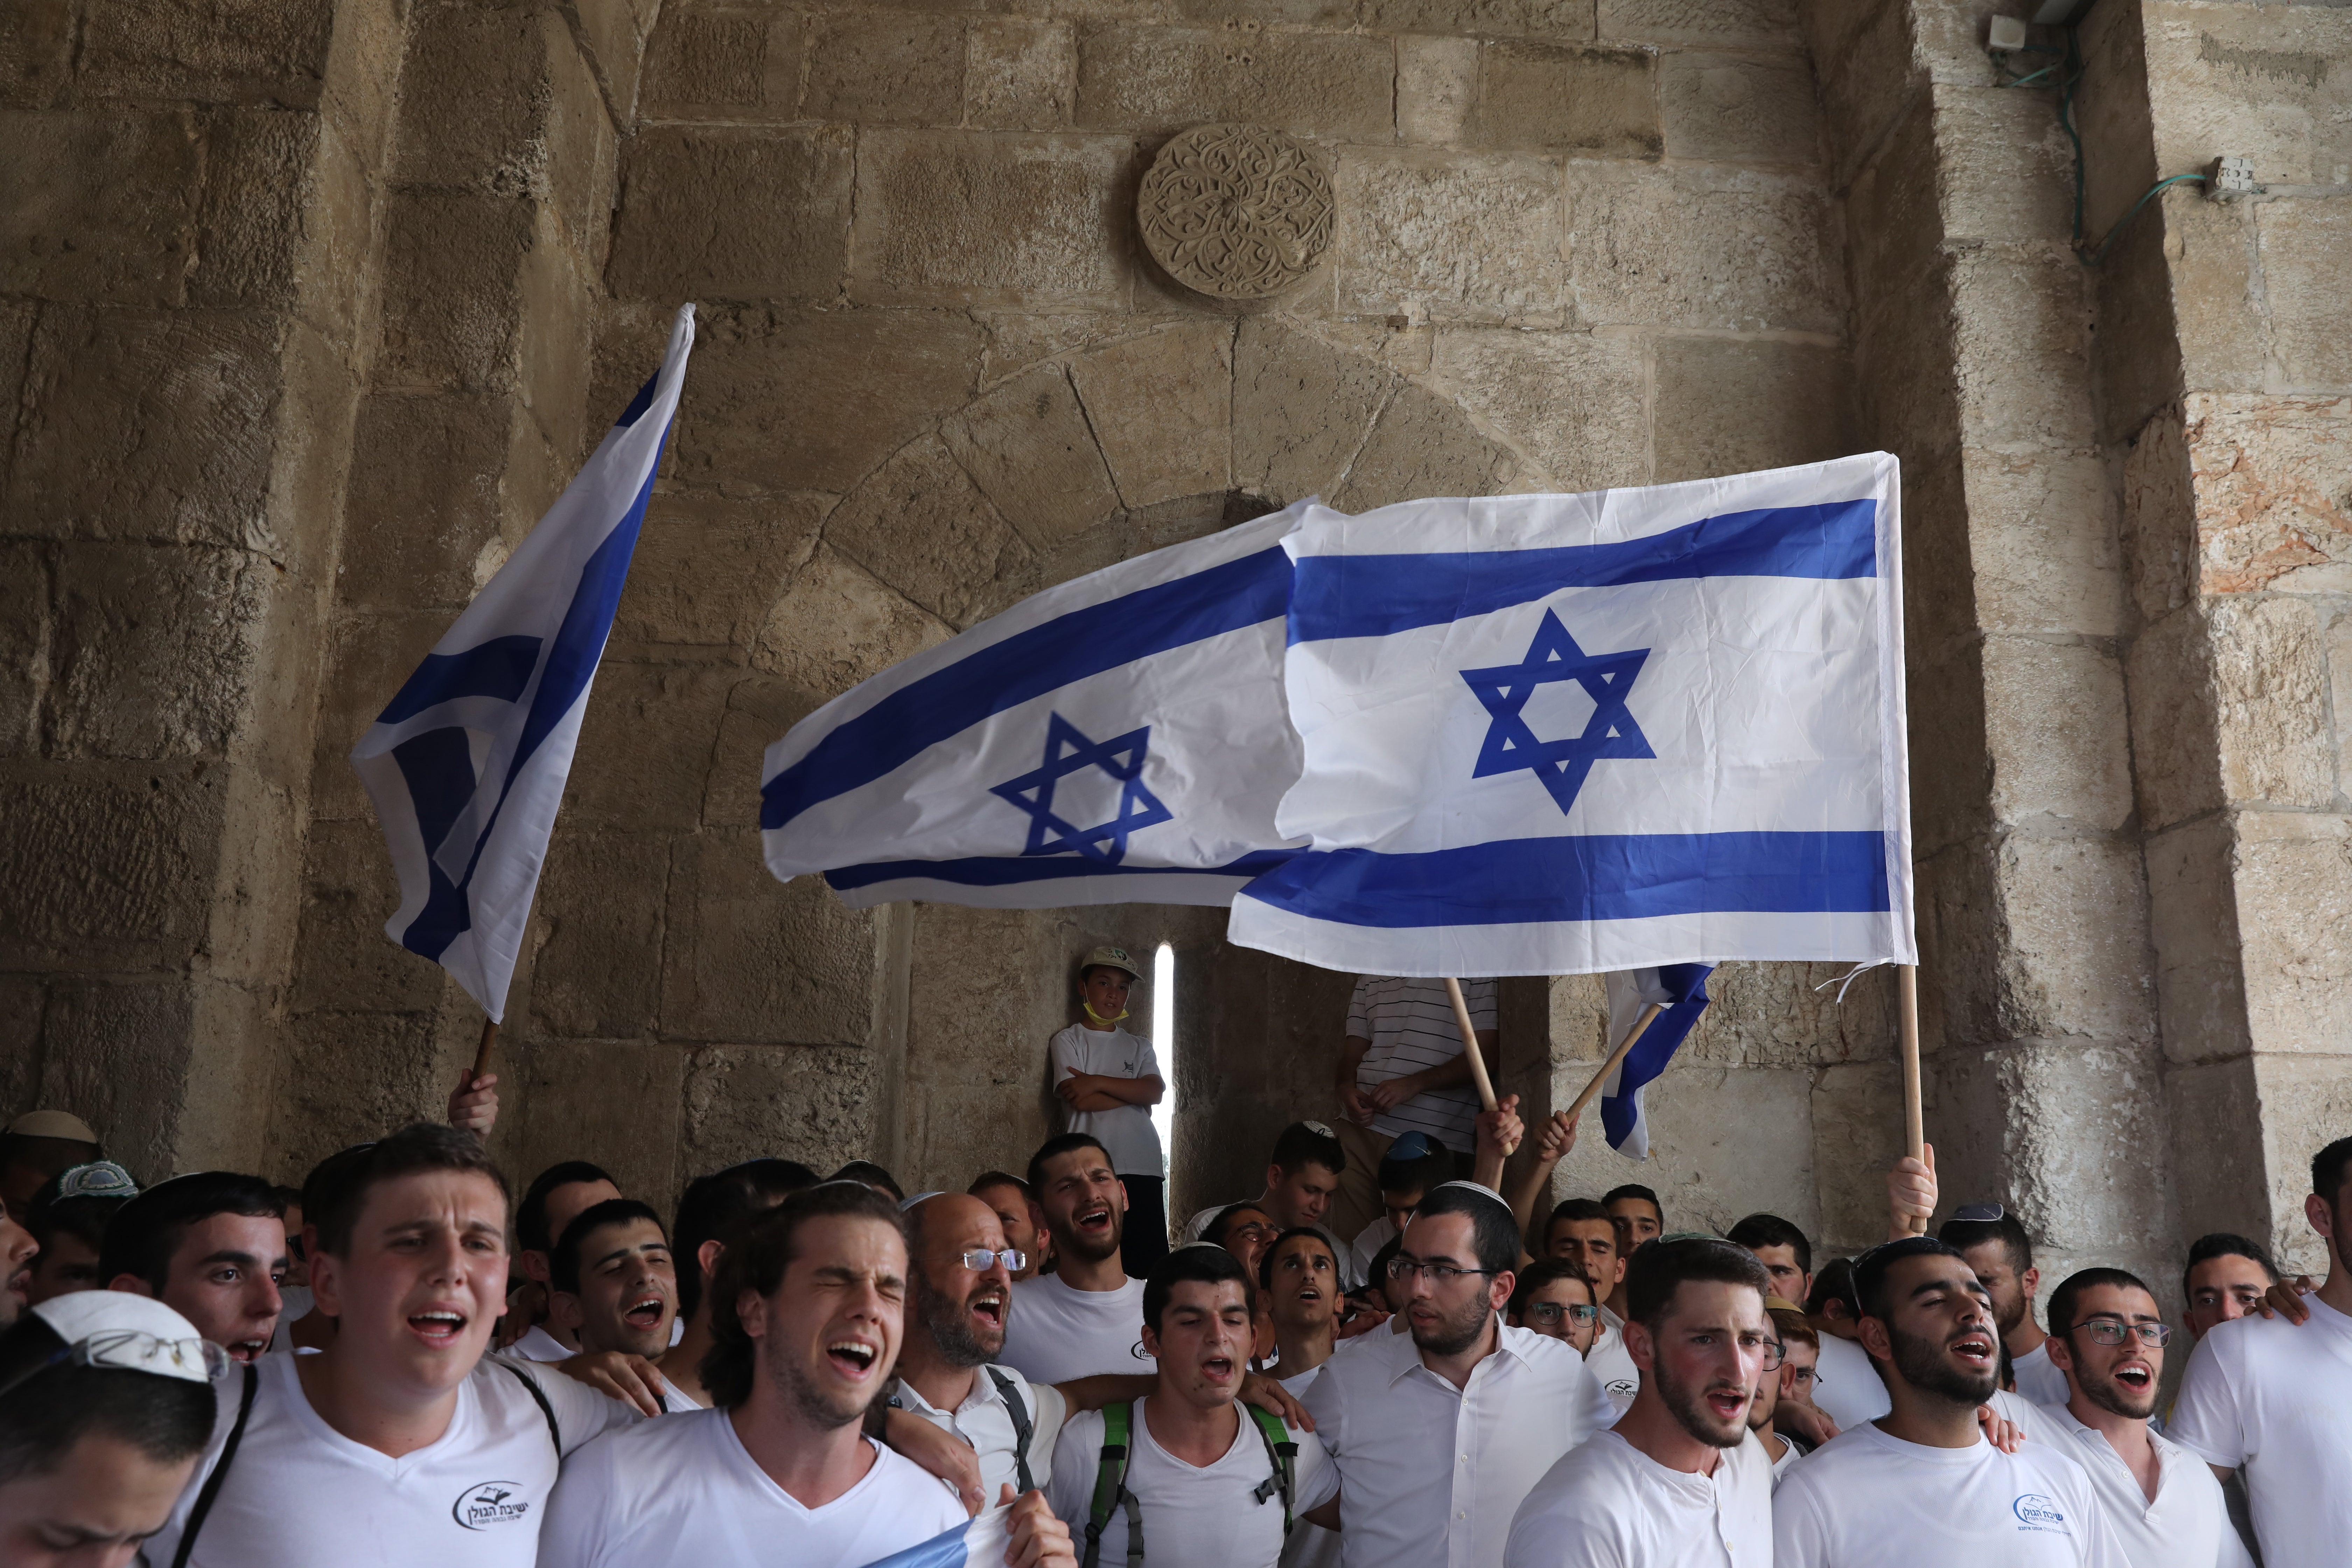 Israelis march with national flags celebrating the Jerusalem liberation day at the Jaffa gate in the old city of Jerusalem, 10 May 2021.